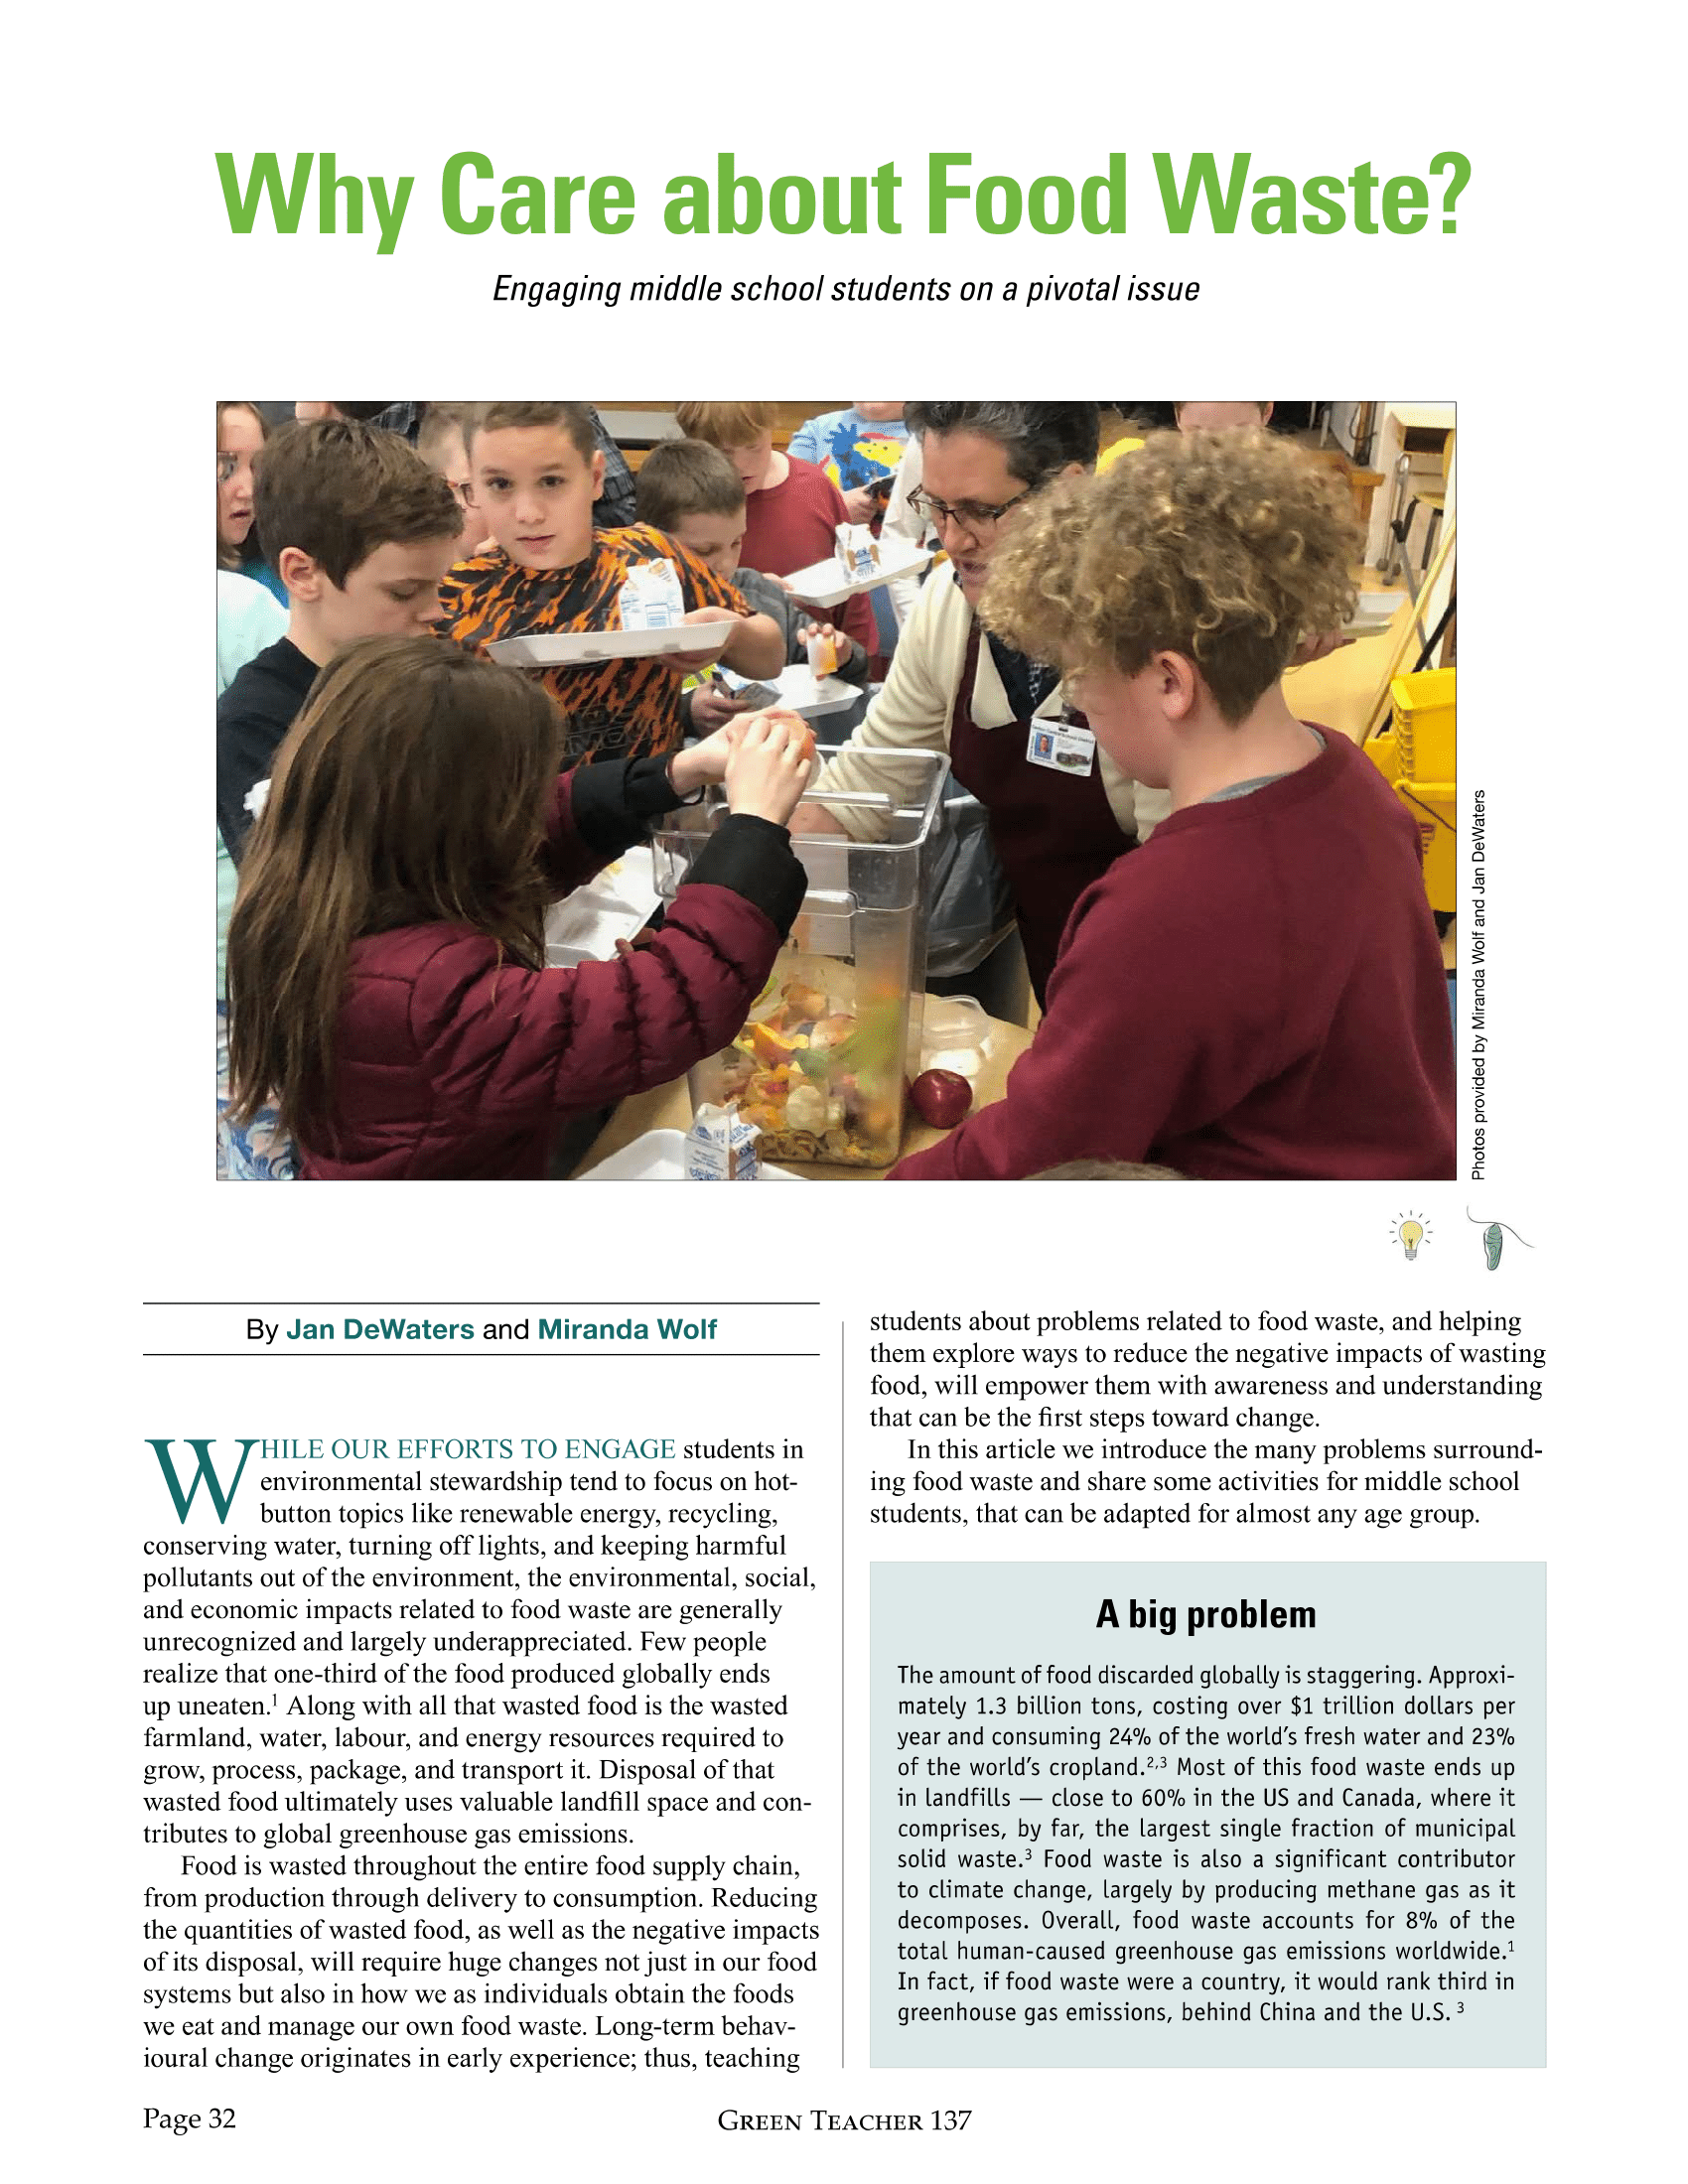 The first page of the article titled Why Care about Food Waste? from Green Teacher Magazine